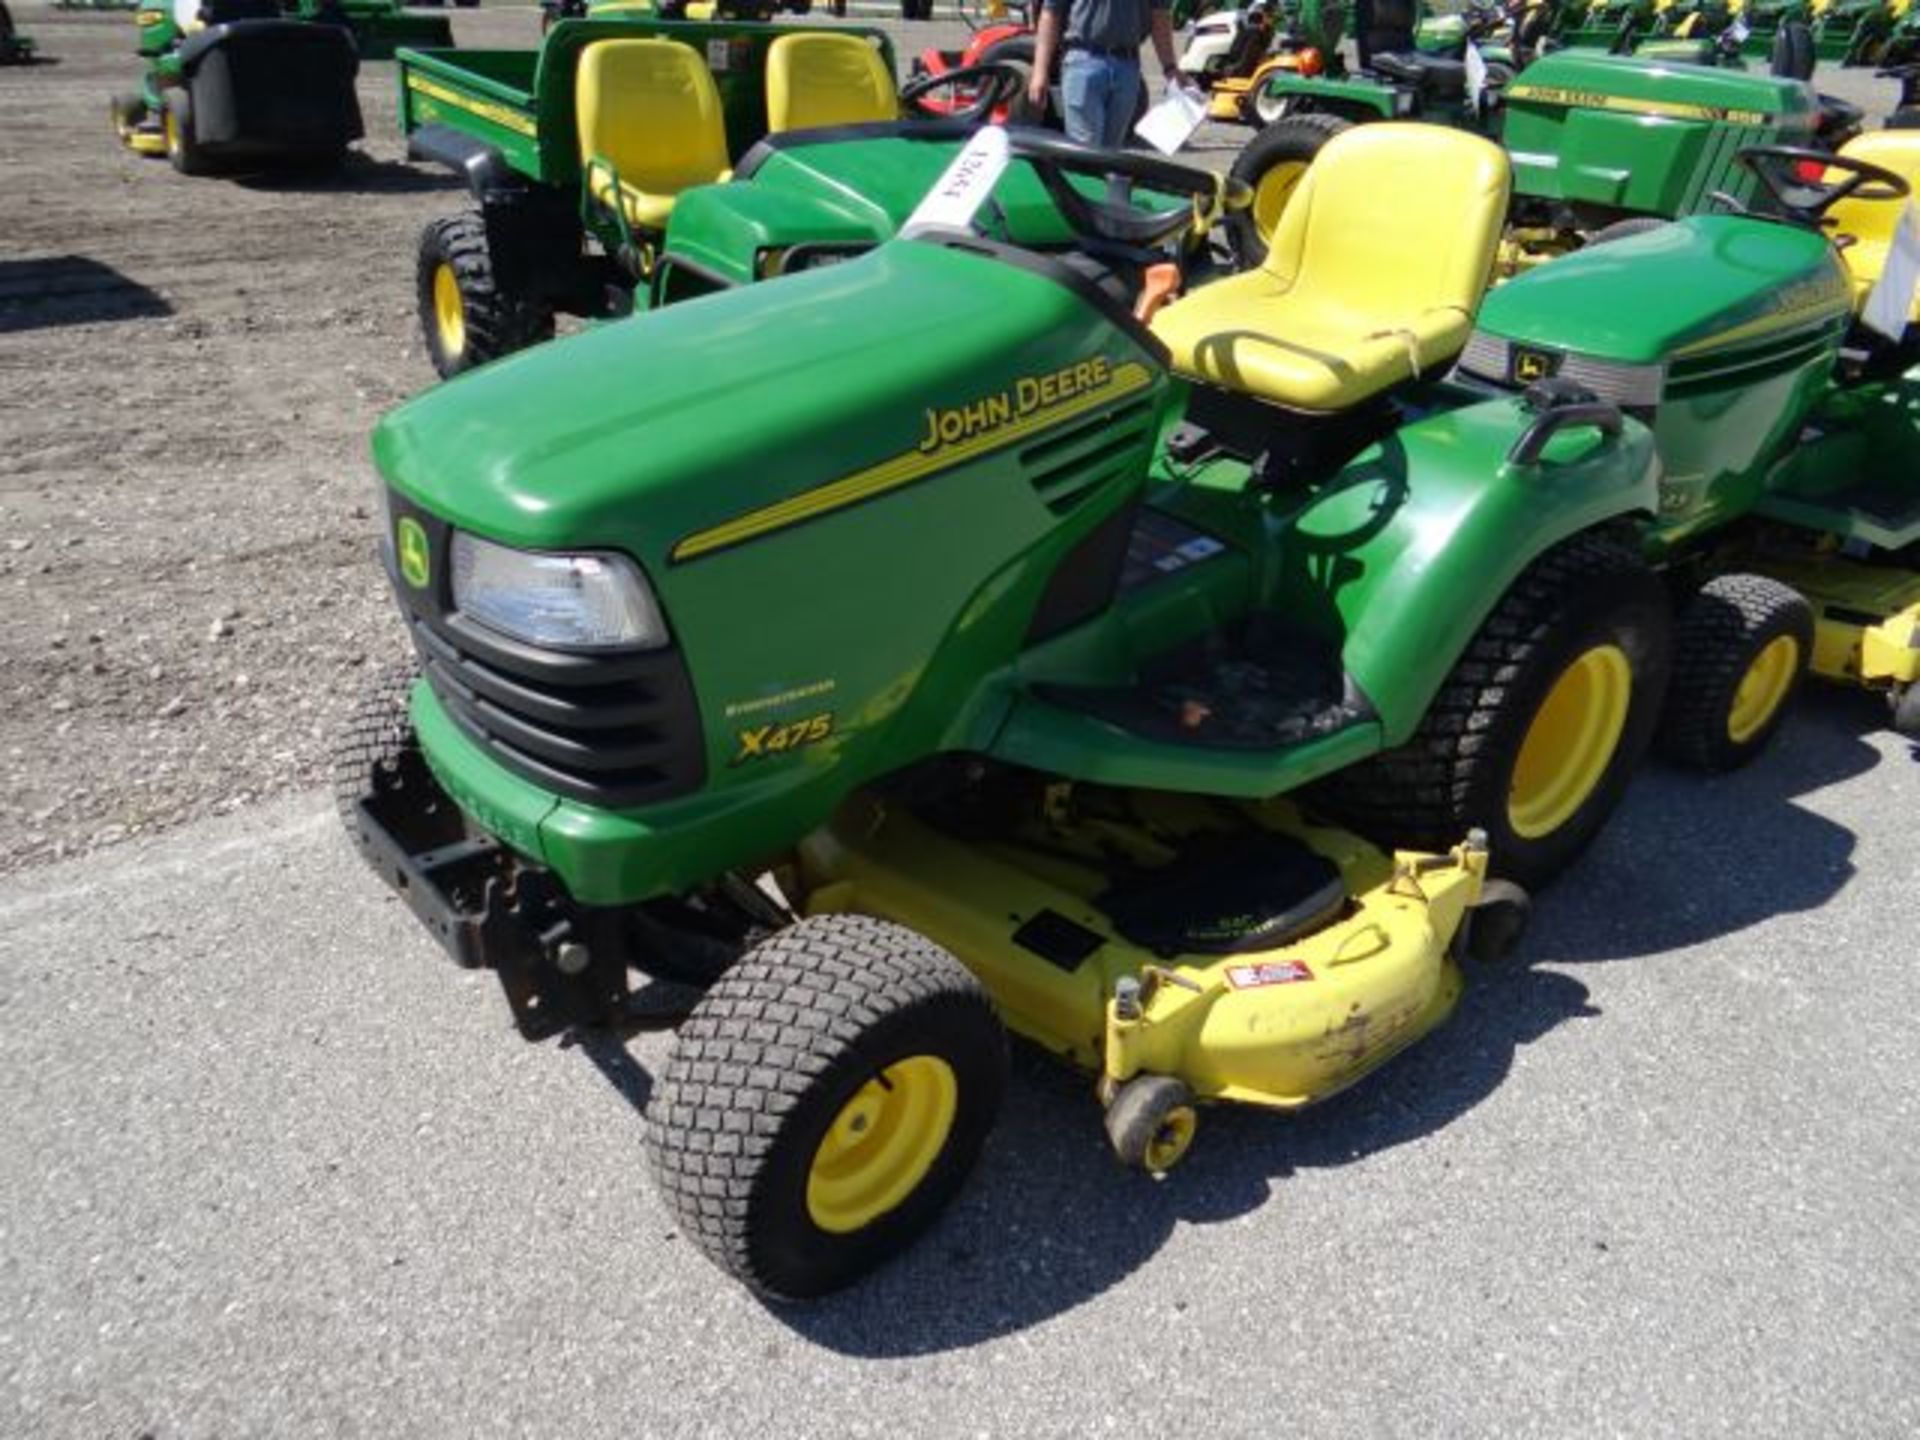 Lot 12654 - 2006 JD X475/54 Mower 984 hrs, 23hp, Kawasaki, Water Cooled, Hydro, Power Steer, Diff - Image 2 of 2